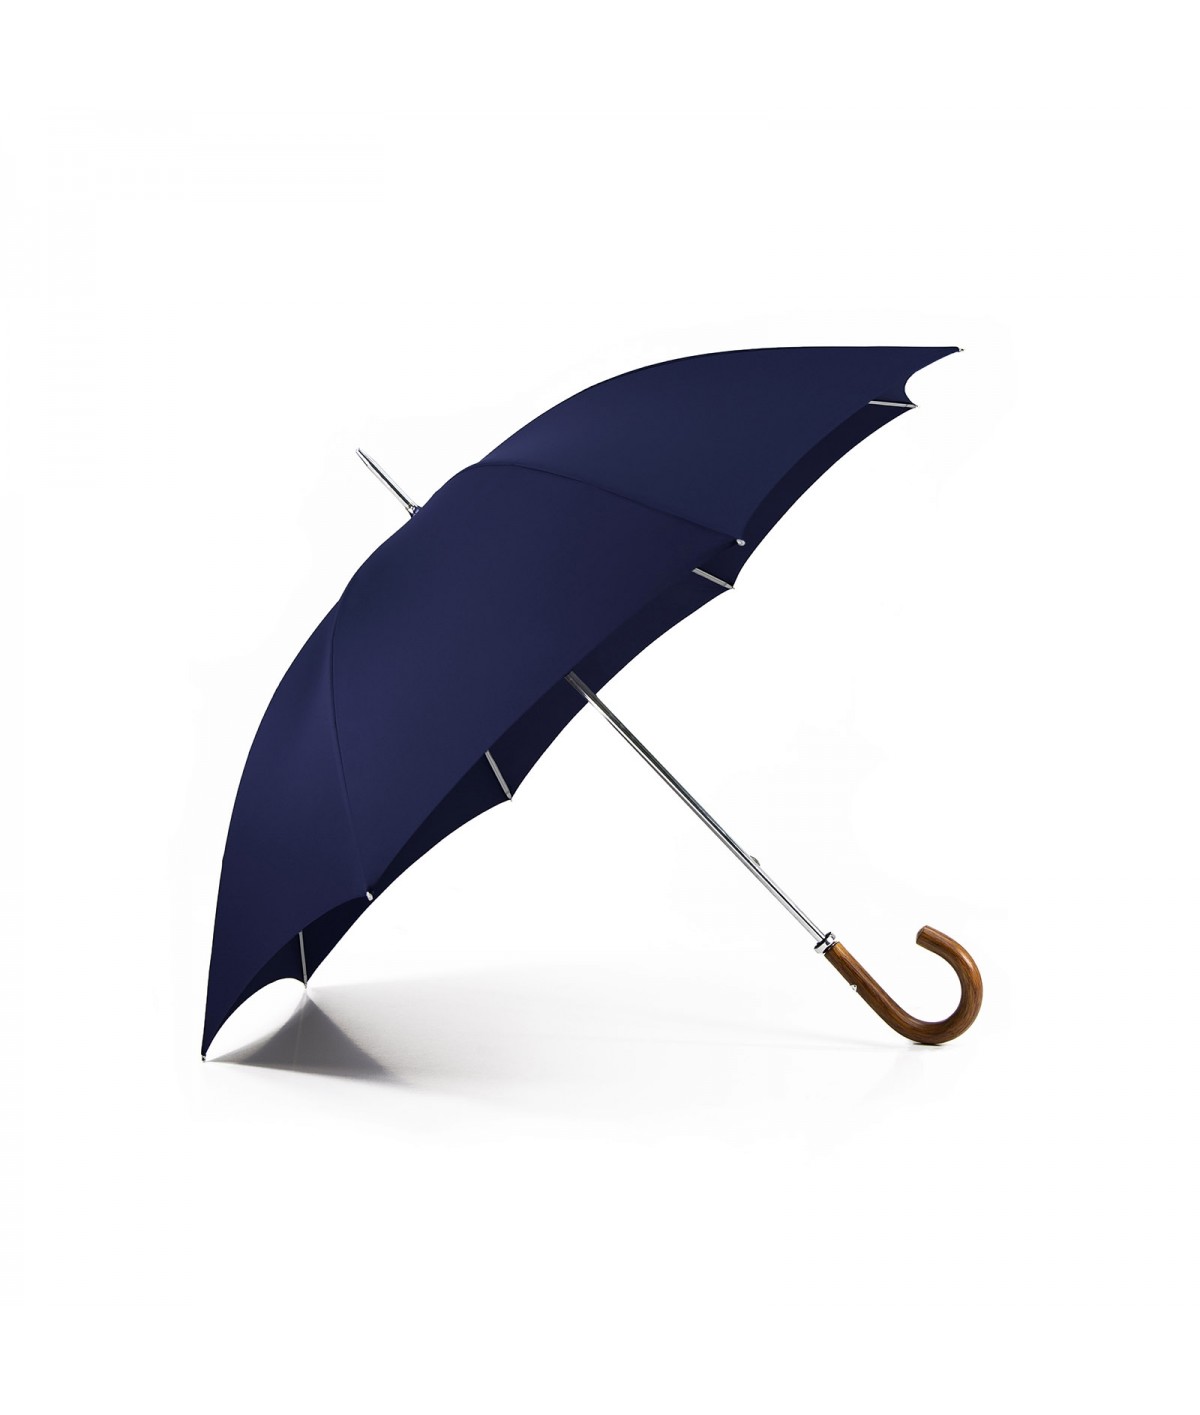 Parapluie "Le Golf" Long - Marine - Fabricant Traditionnel - Made in France